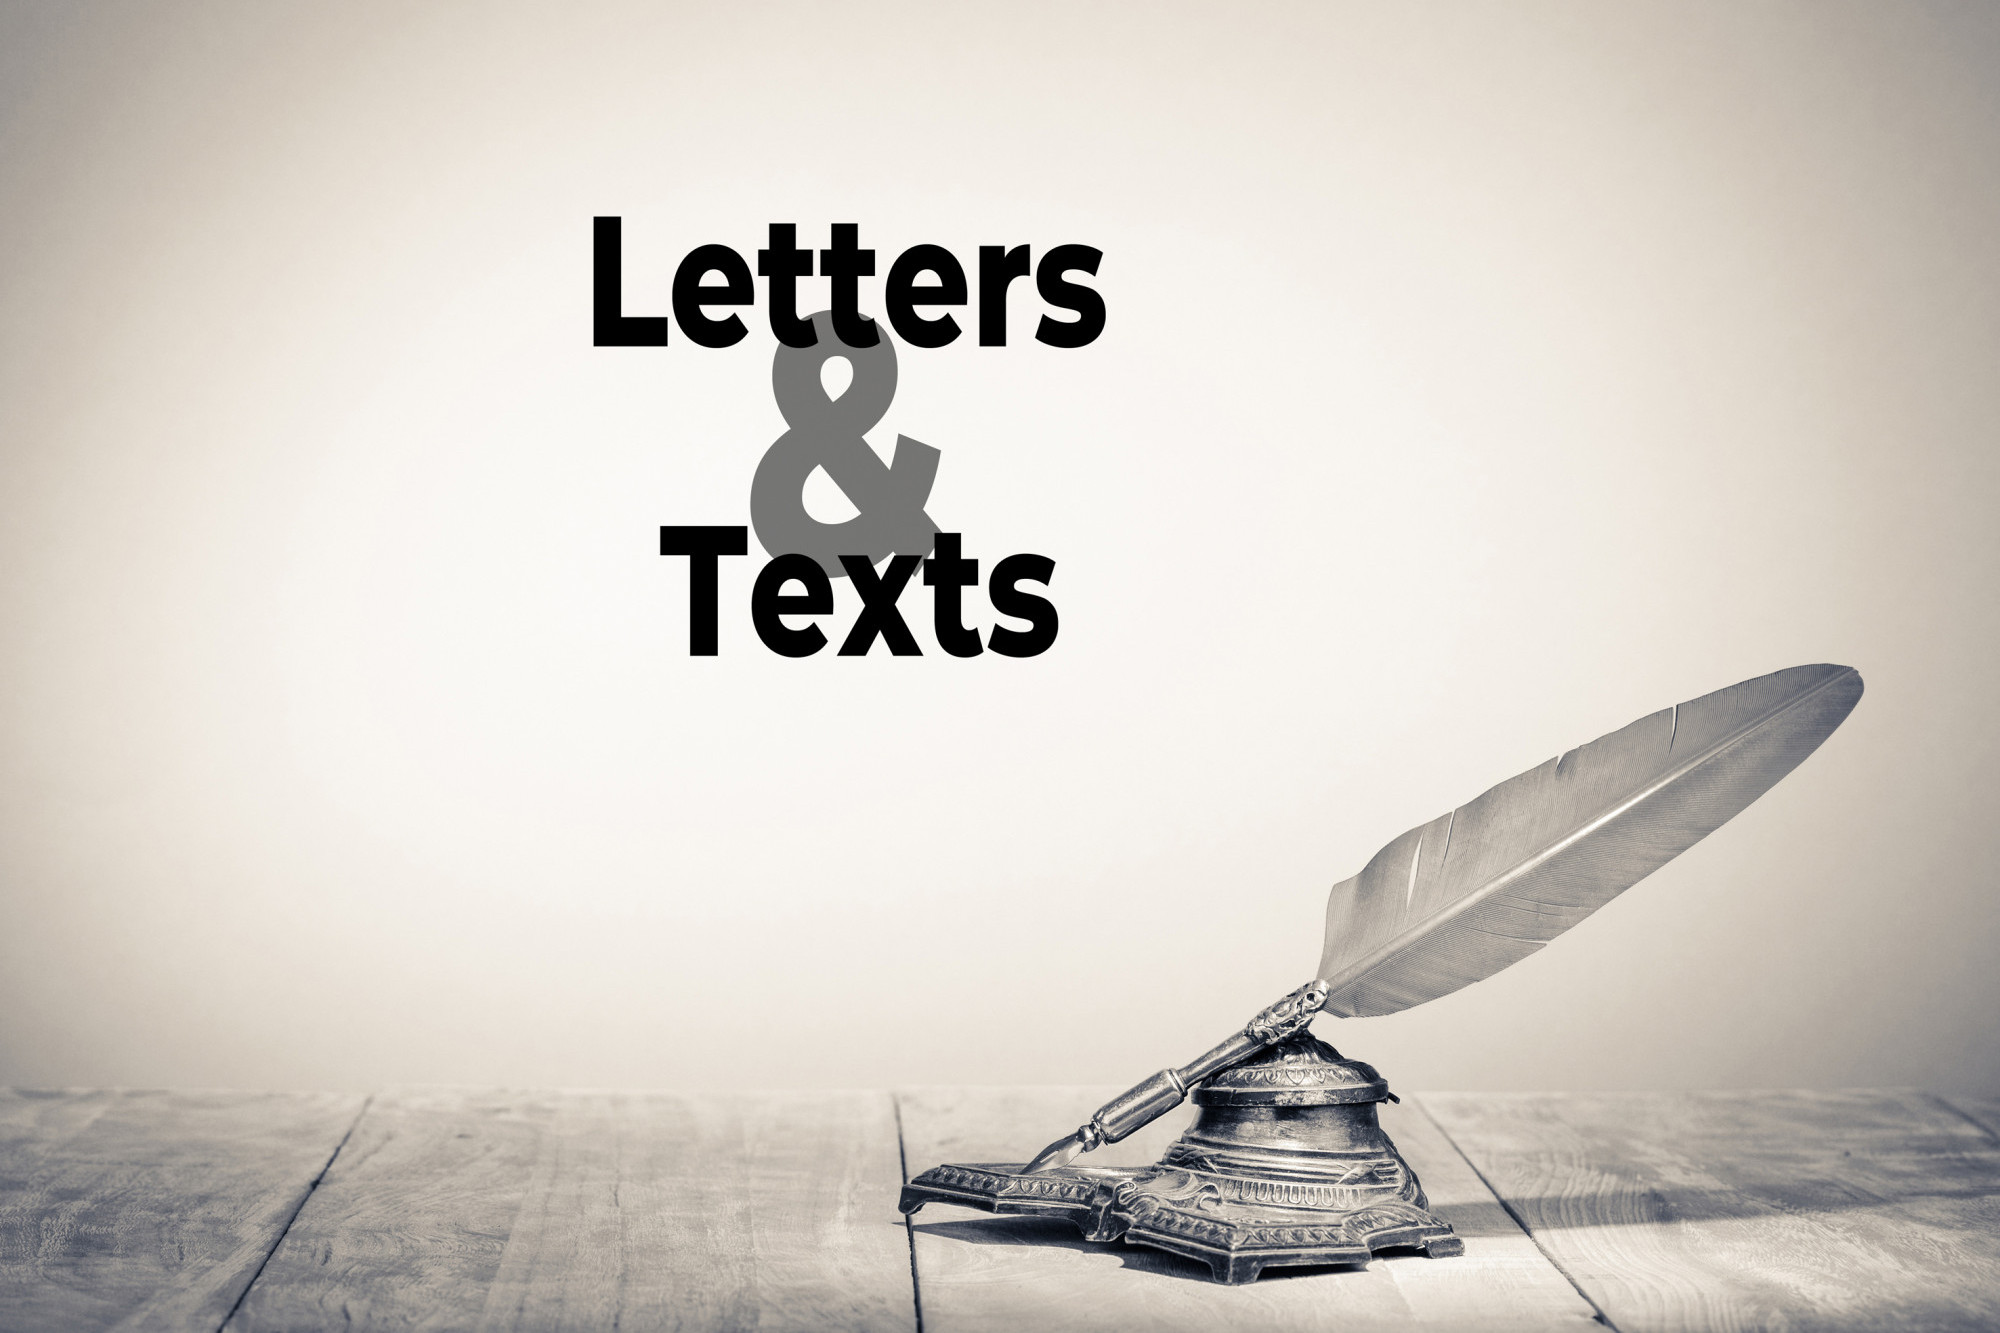 Texts and Letters June 11, 2021 - feature photo